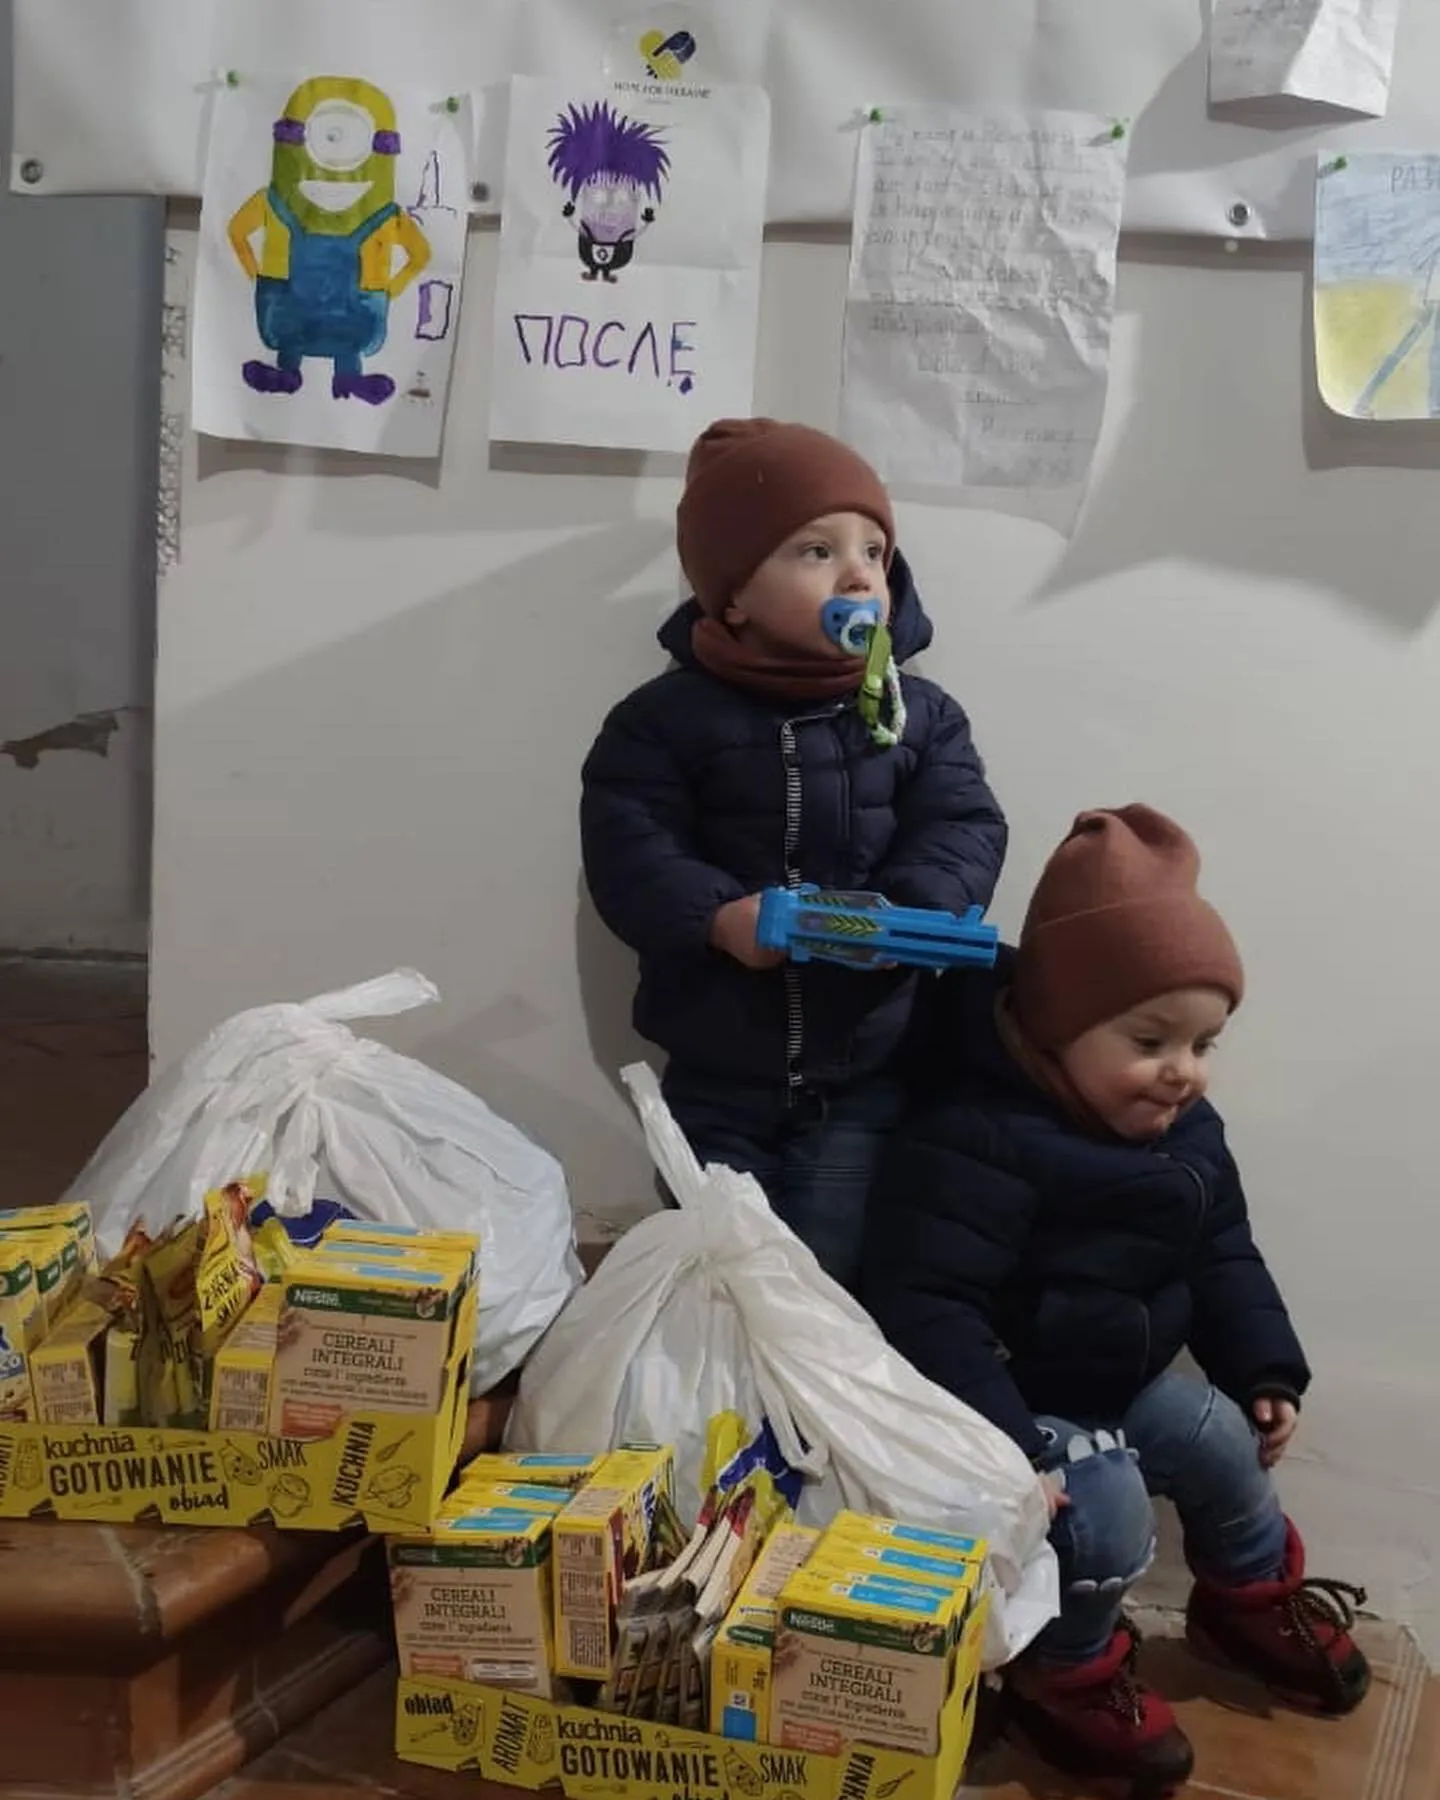 two children sitting on the floor with boxes and bags.